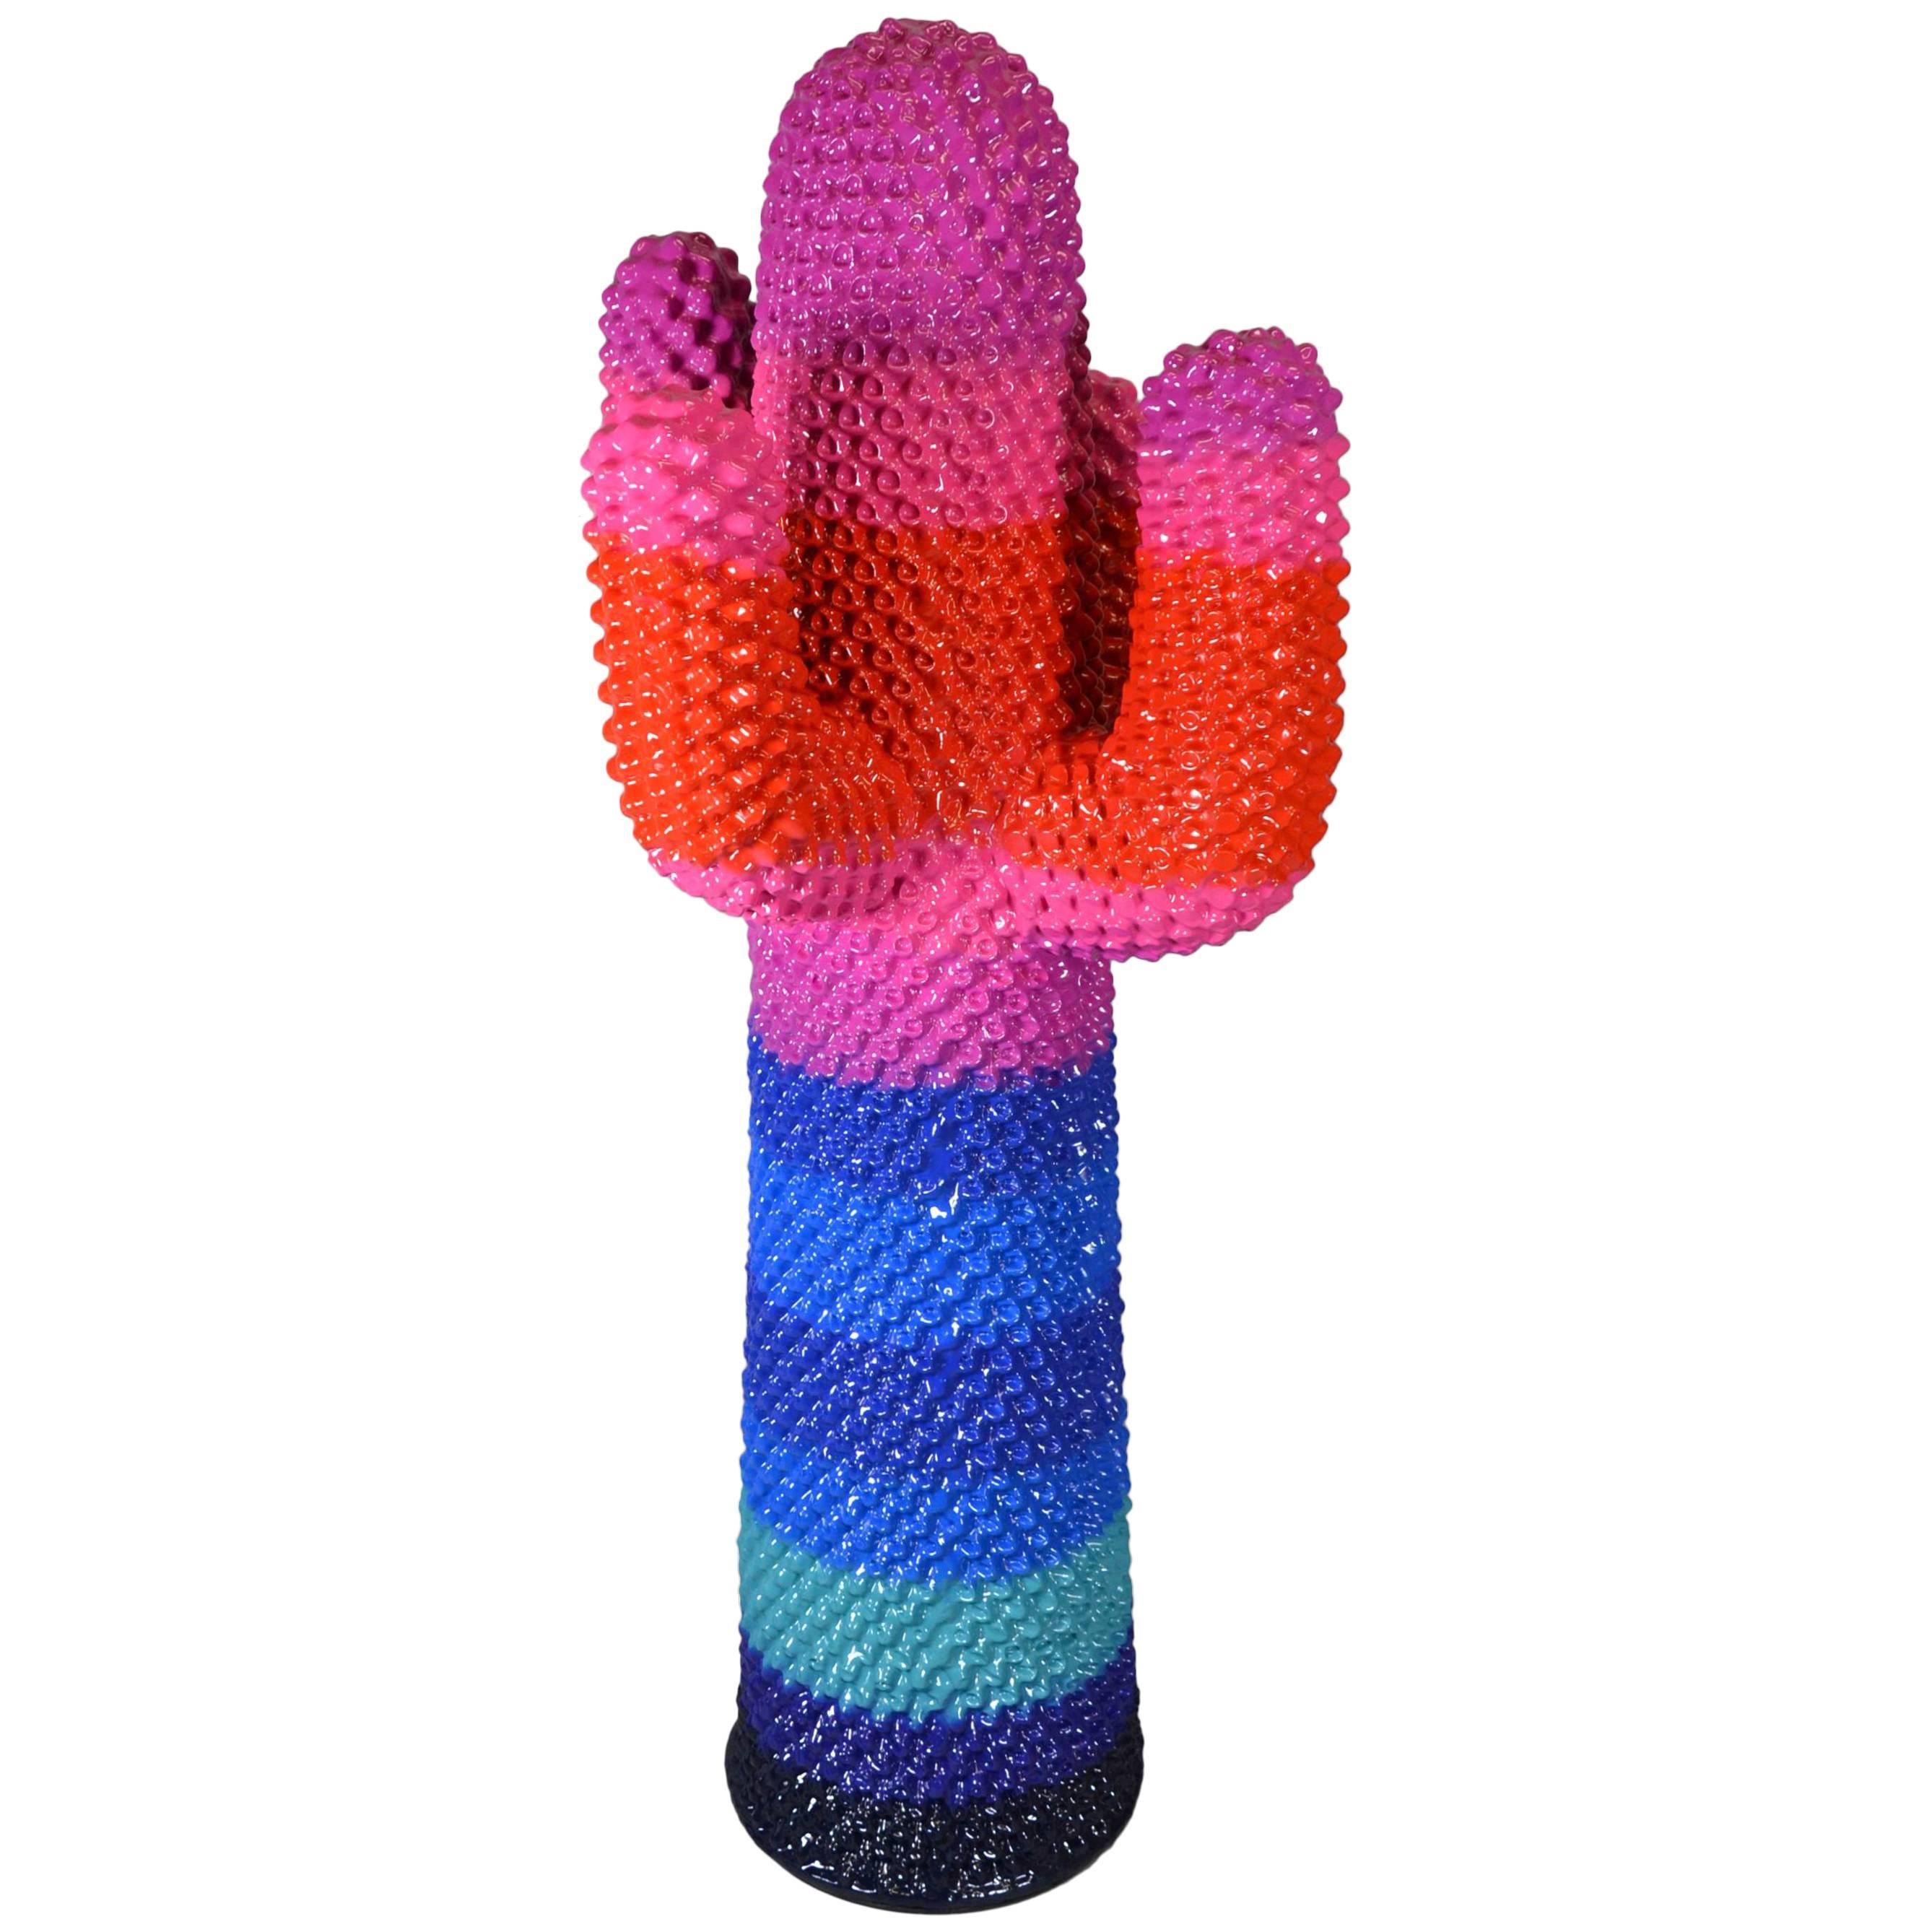 Psychedelic Cactus Gufram Drocco Mello & Paul Smith Limited Edition For Sale